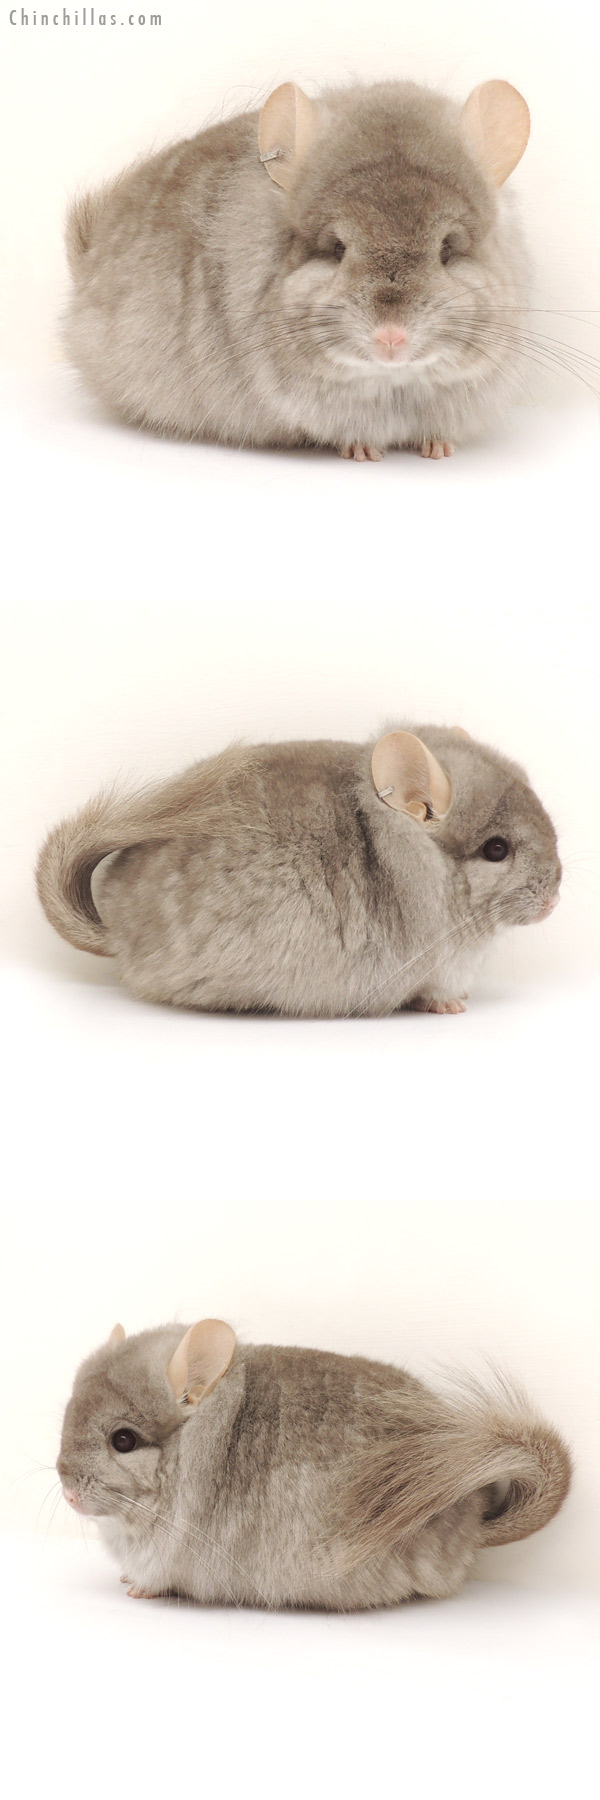 Chinchilla or related item offered for sale or export on Chinchillas.com - 14127 Exceptional Beige Royal Persian Angora Female Chinchilla